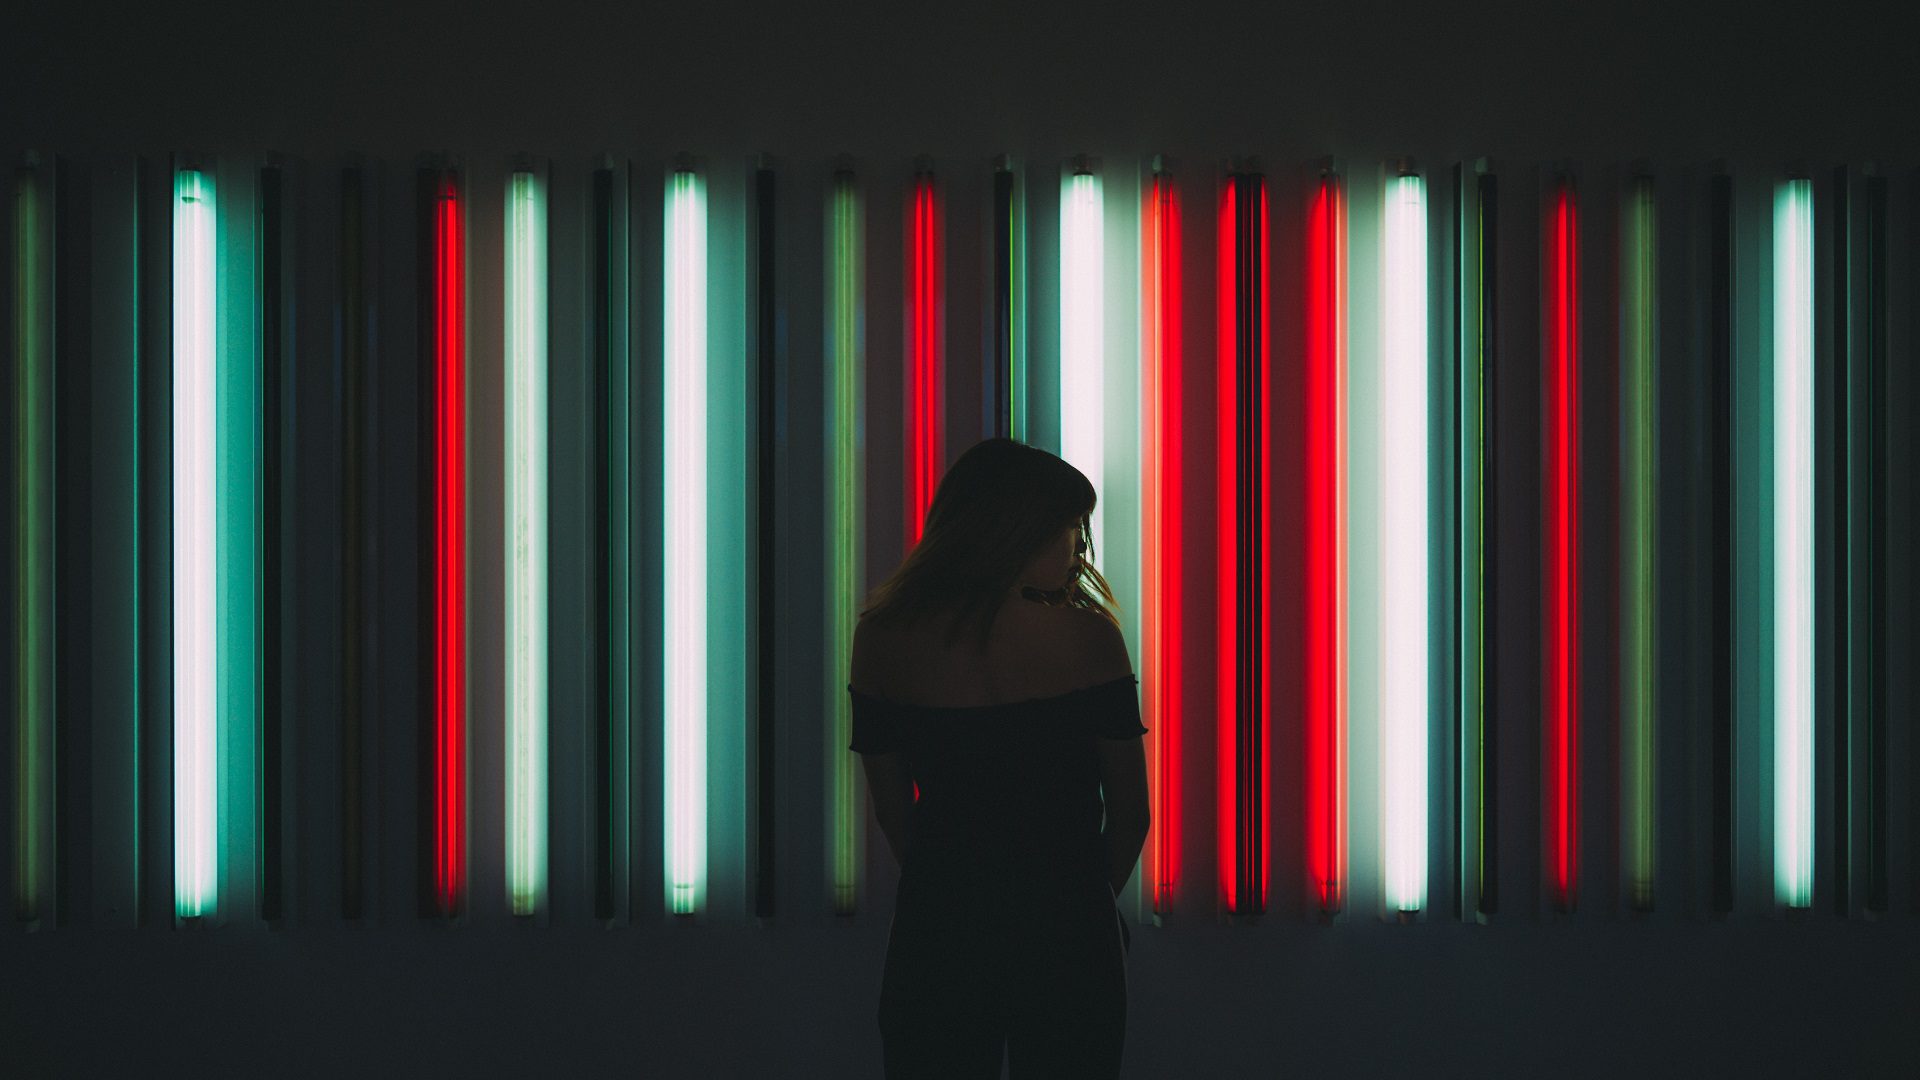 Abstract street photography of girl silhouette in front of red, white, and green striped lighting installation